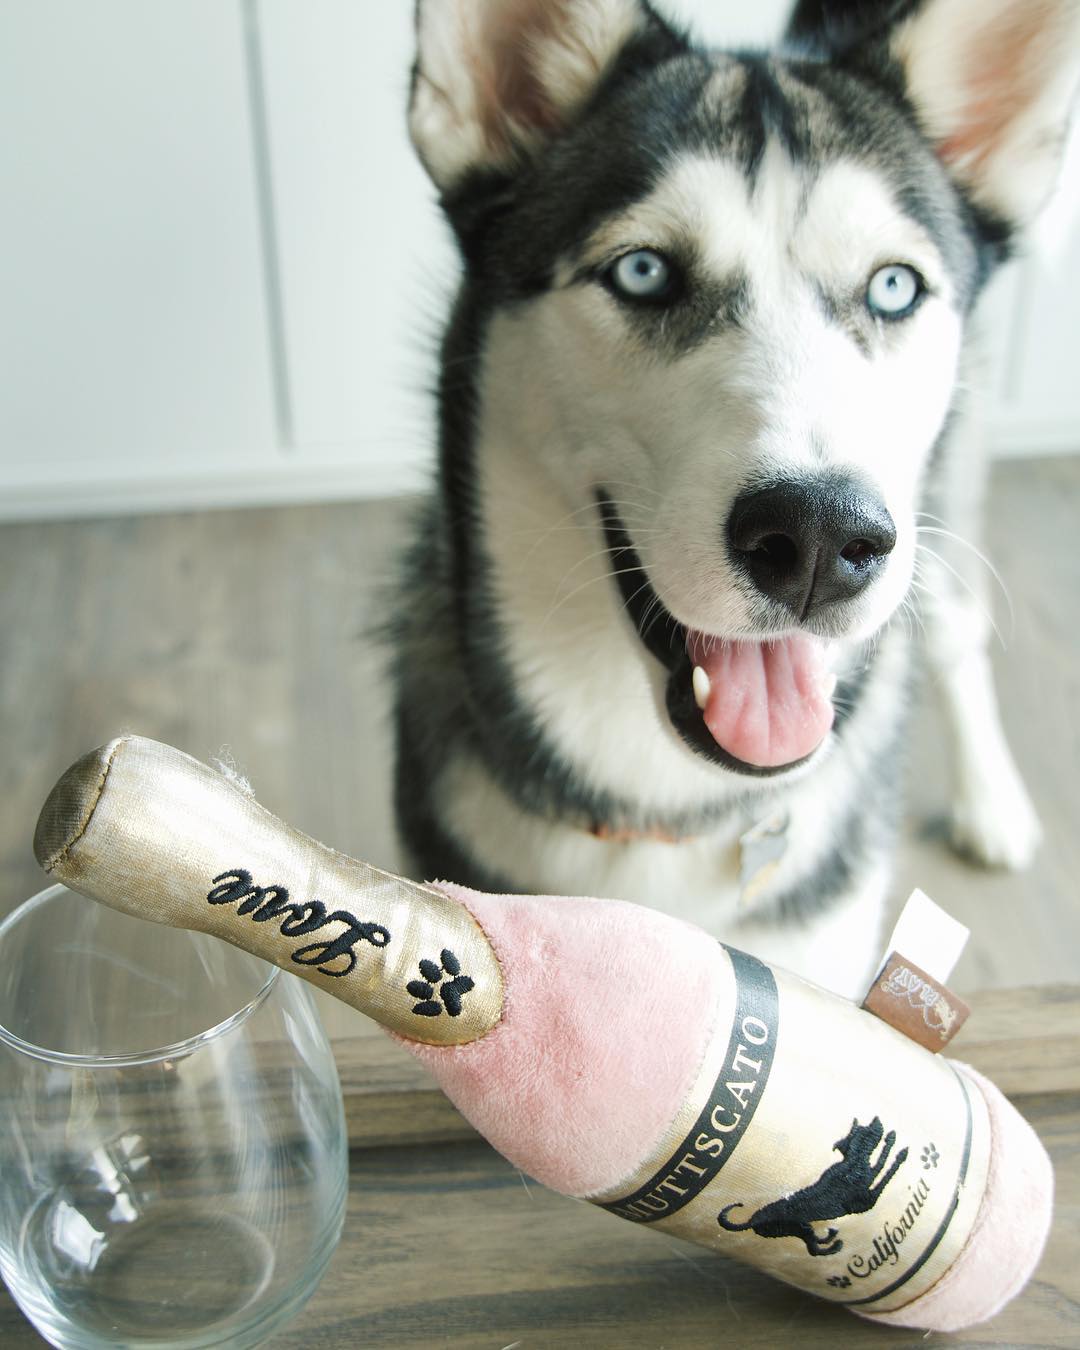 A Husky standing on the floor behind the bottle of wine and a glass on top of the table